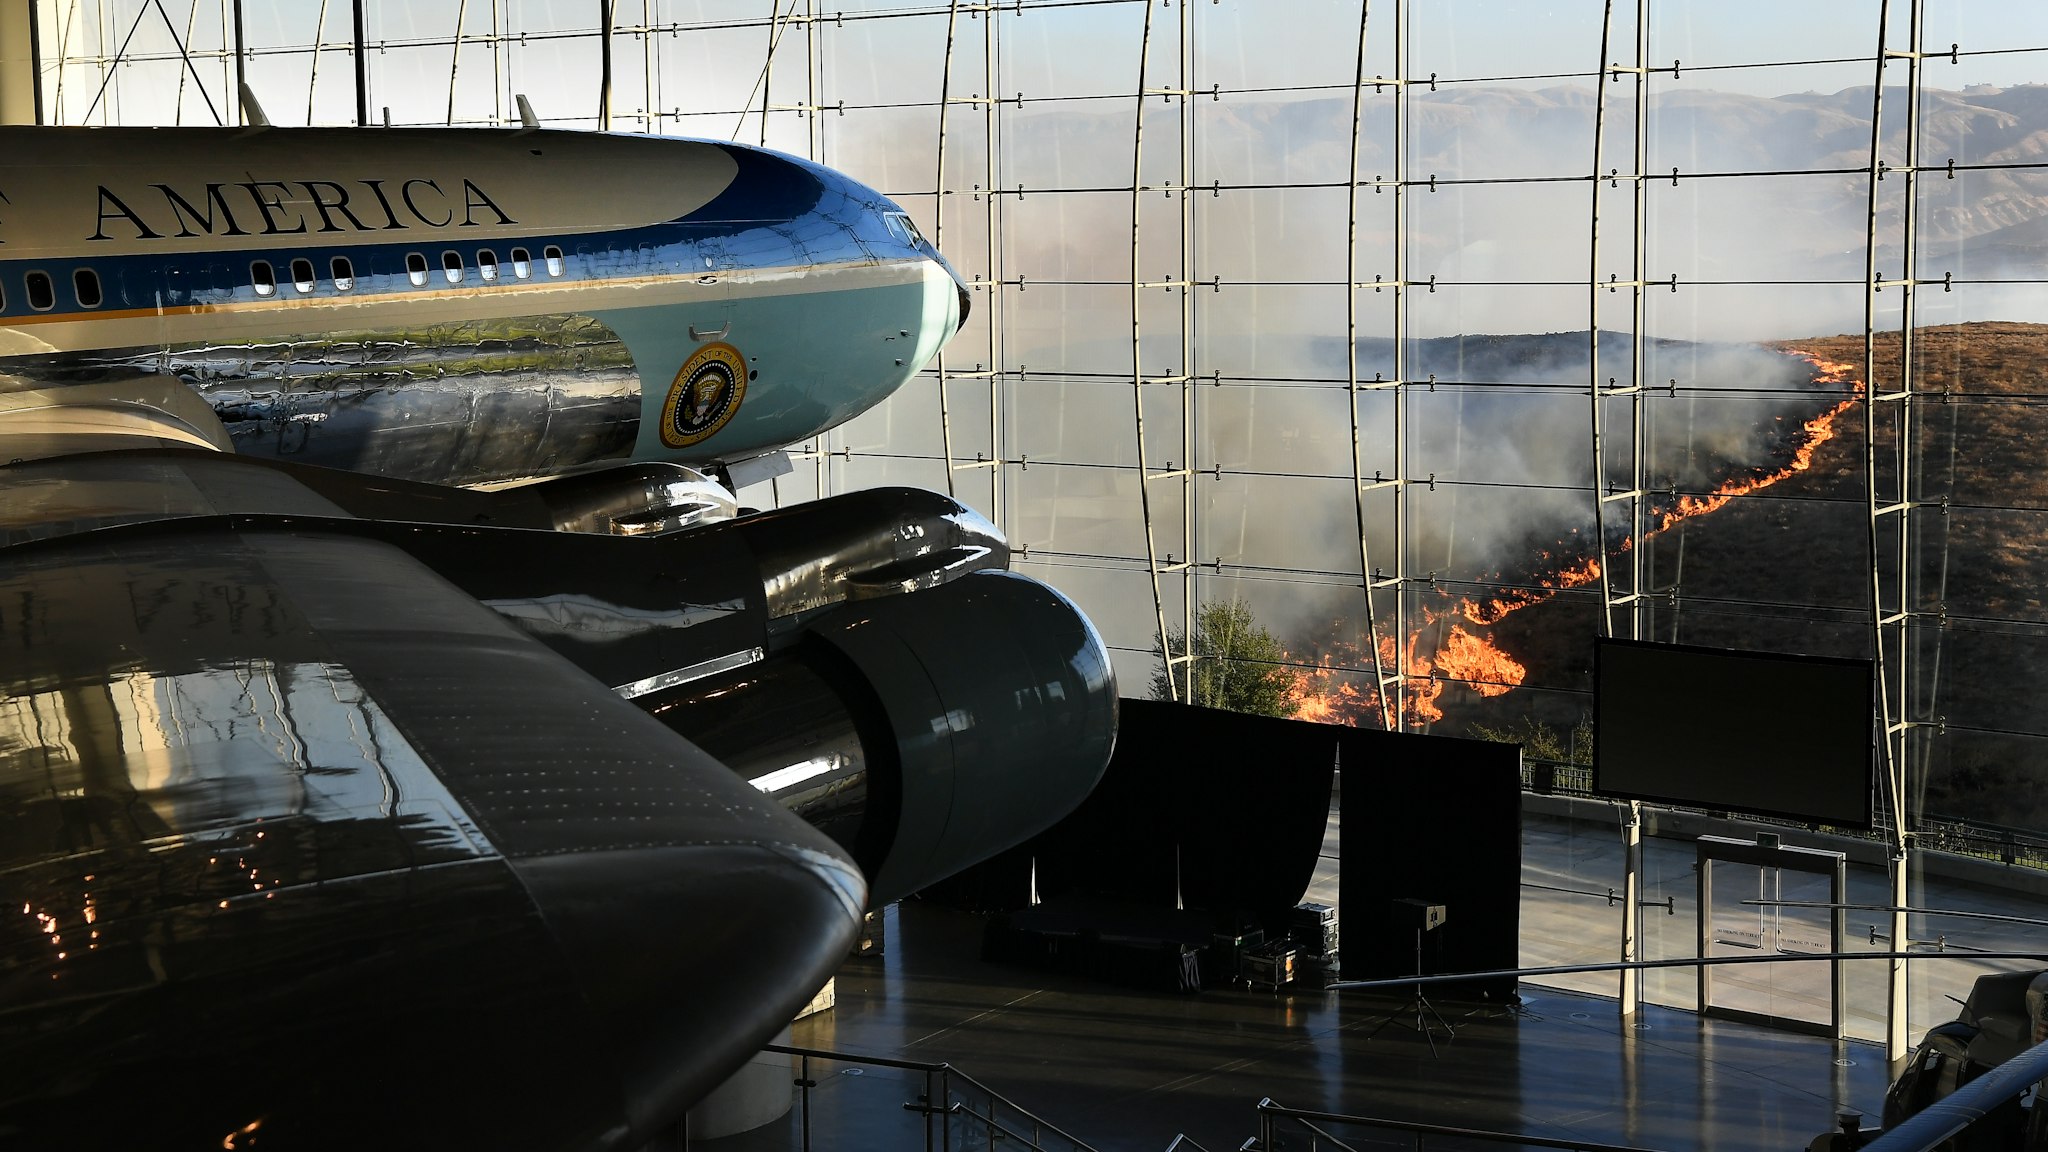 SIMI VALLEY, CALIFORNIA - OCTOBER 30: Former U.S. President Ronald Reagan's Air Force One sits on display at the Reagan Presidential Library as the Easy Fire burns in the hills on October 30, 2019 in Simi Valley, California. (Photo by Wally Skalij/Los Angeles Times via Getty Images)